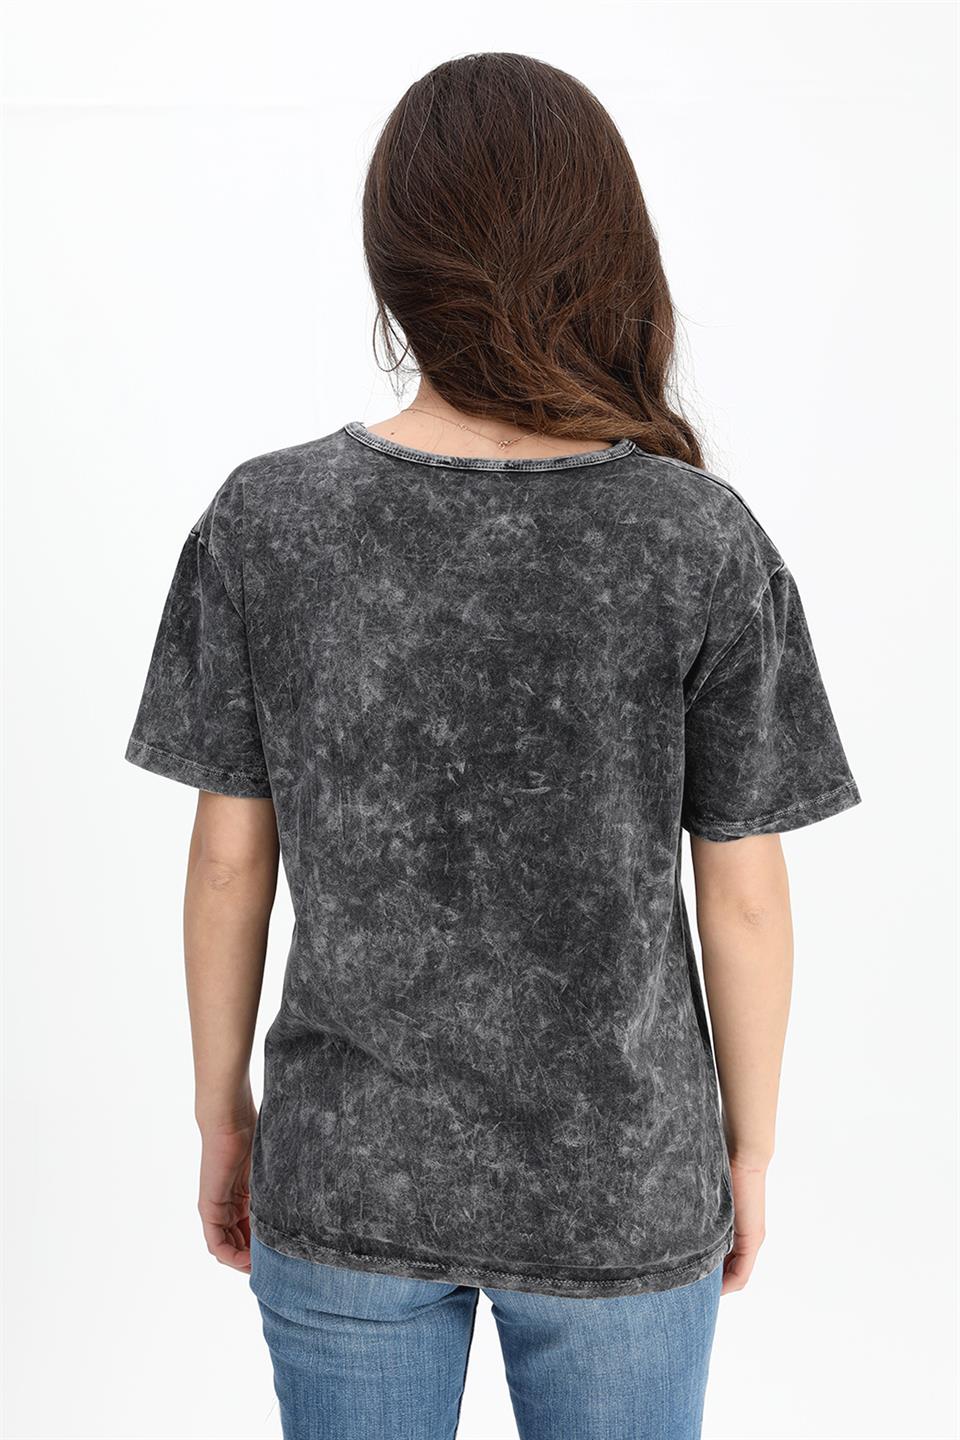 Women's T-shirt Washed Fabric Crew Neck - Anthracite - STREETMODE™